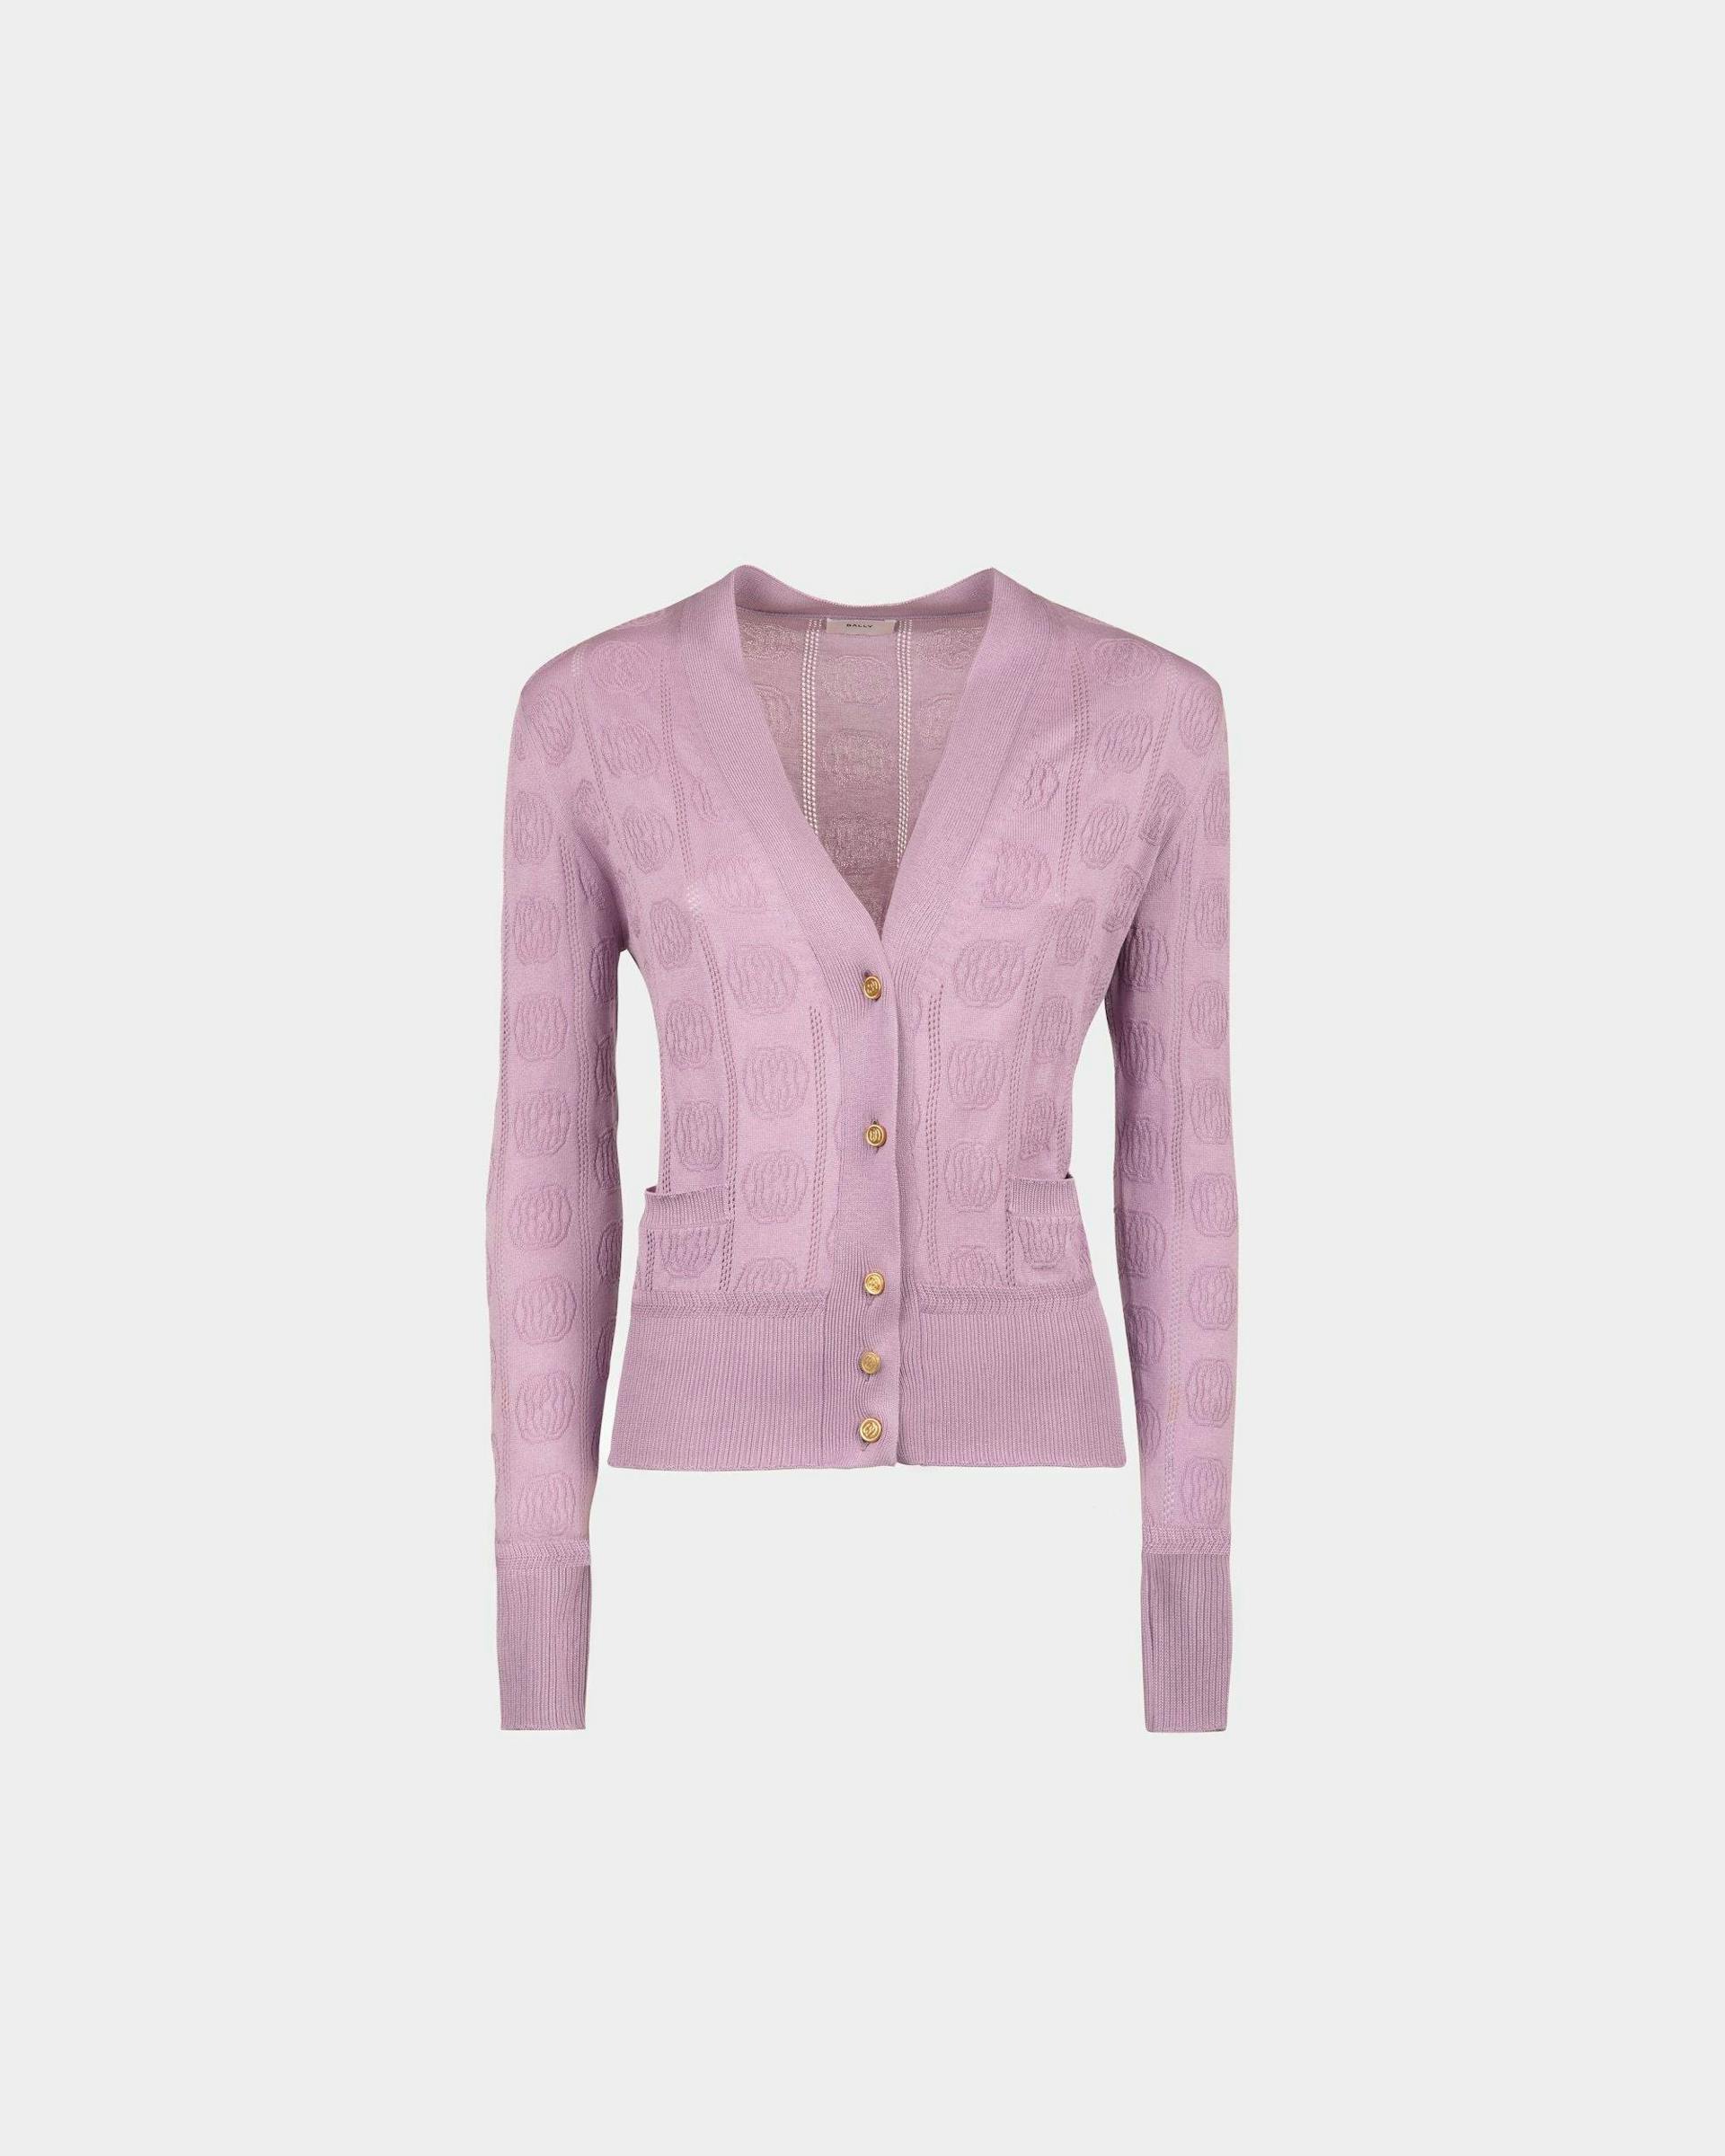 Women's Lilac Cardigan in a Silk Blend | Bally | Still Life Front